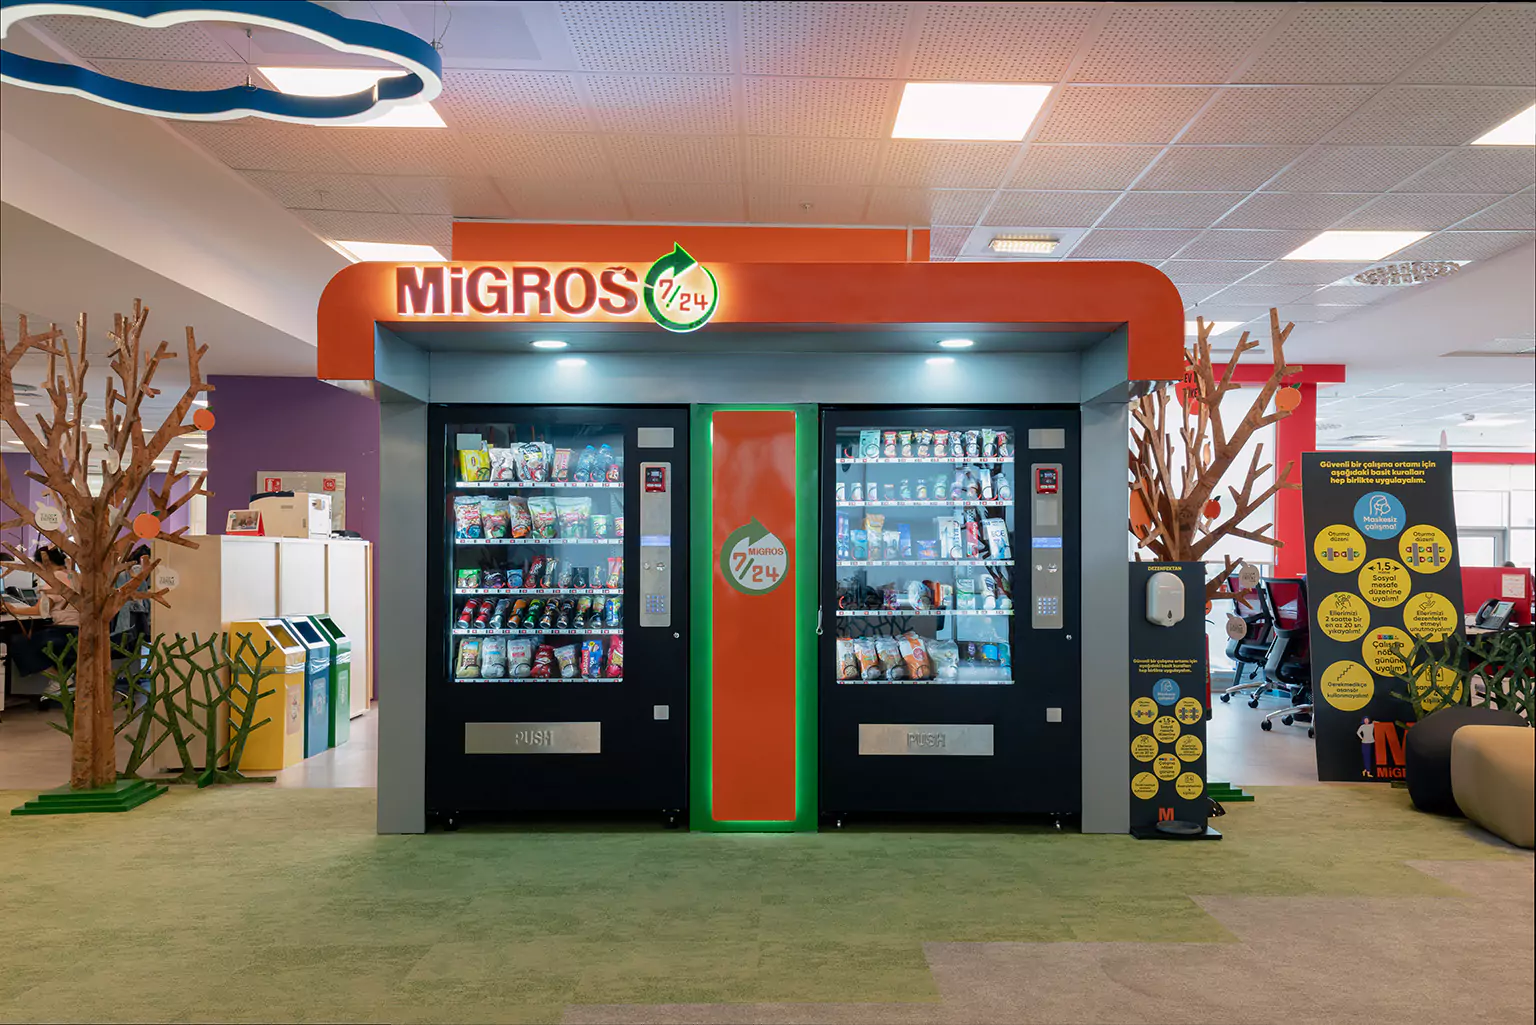 Migros Automated Smart Store Design & Implementation